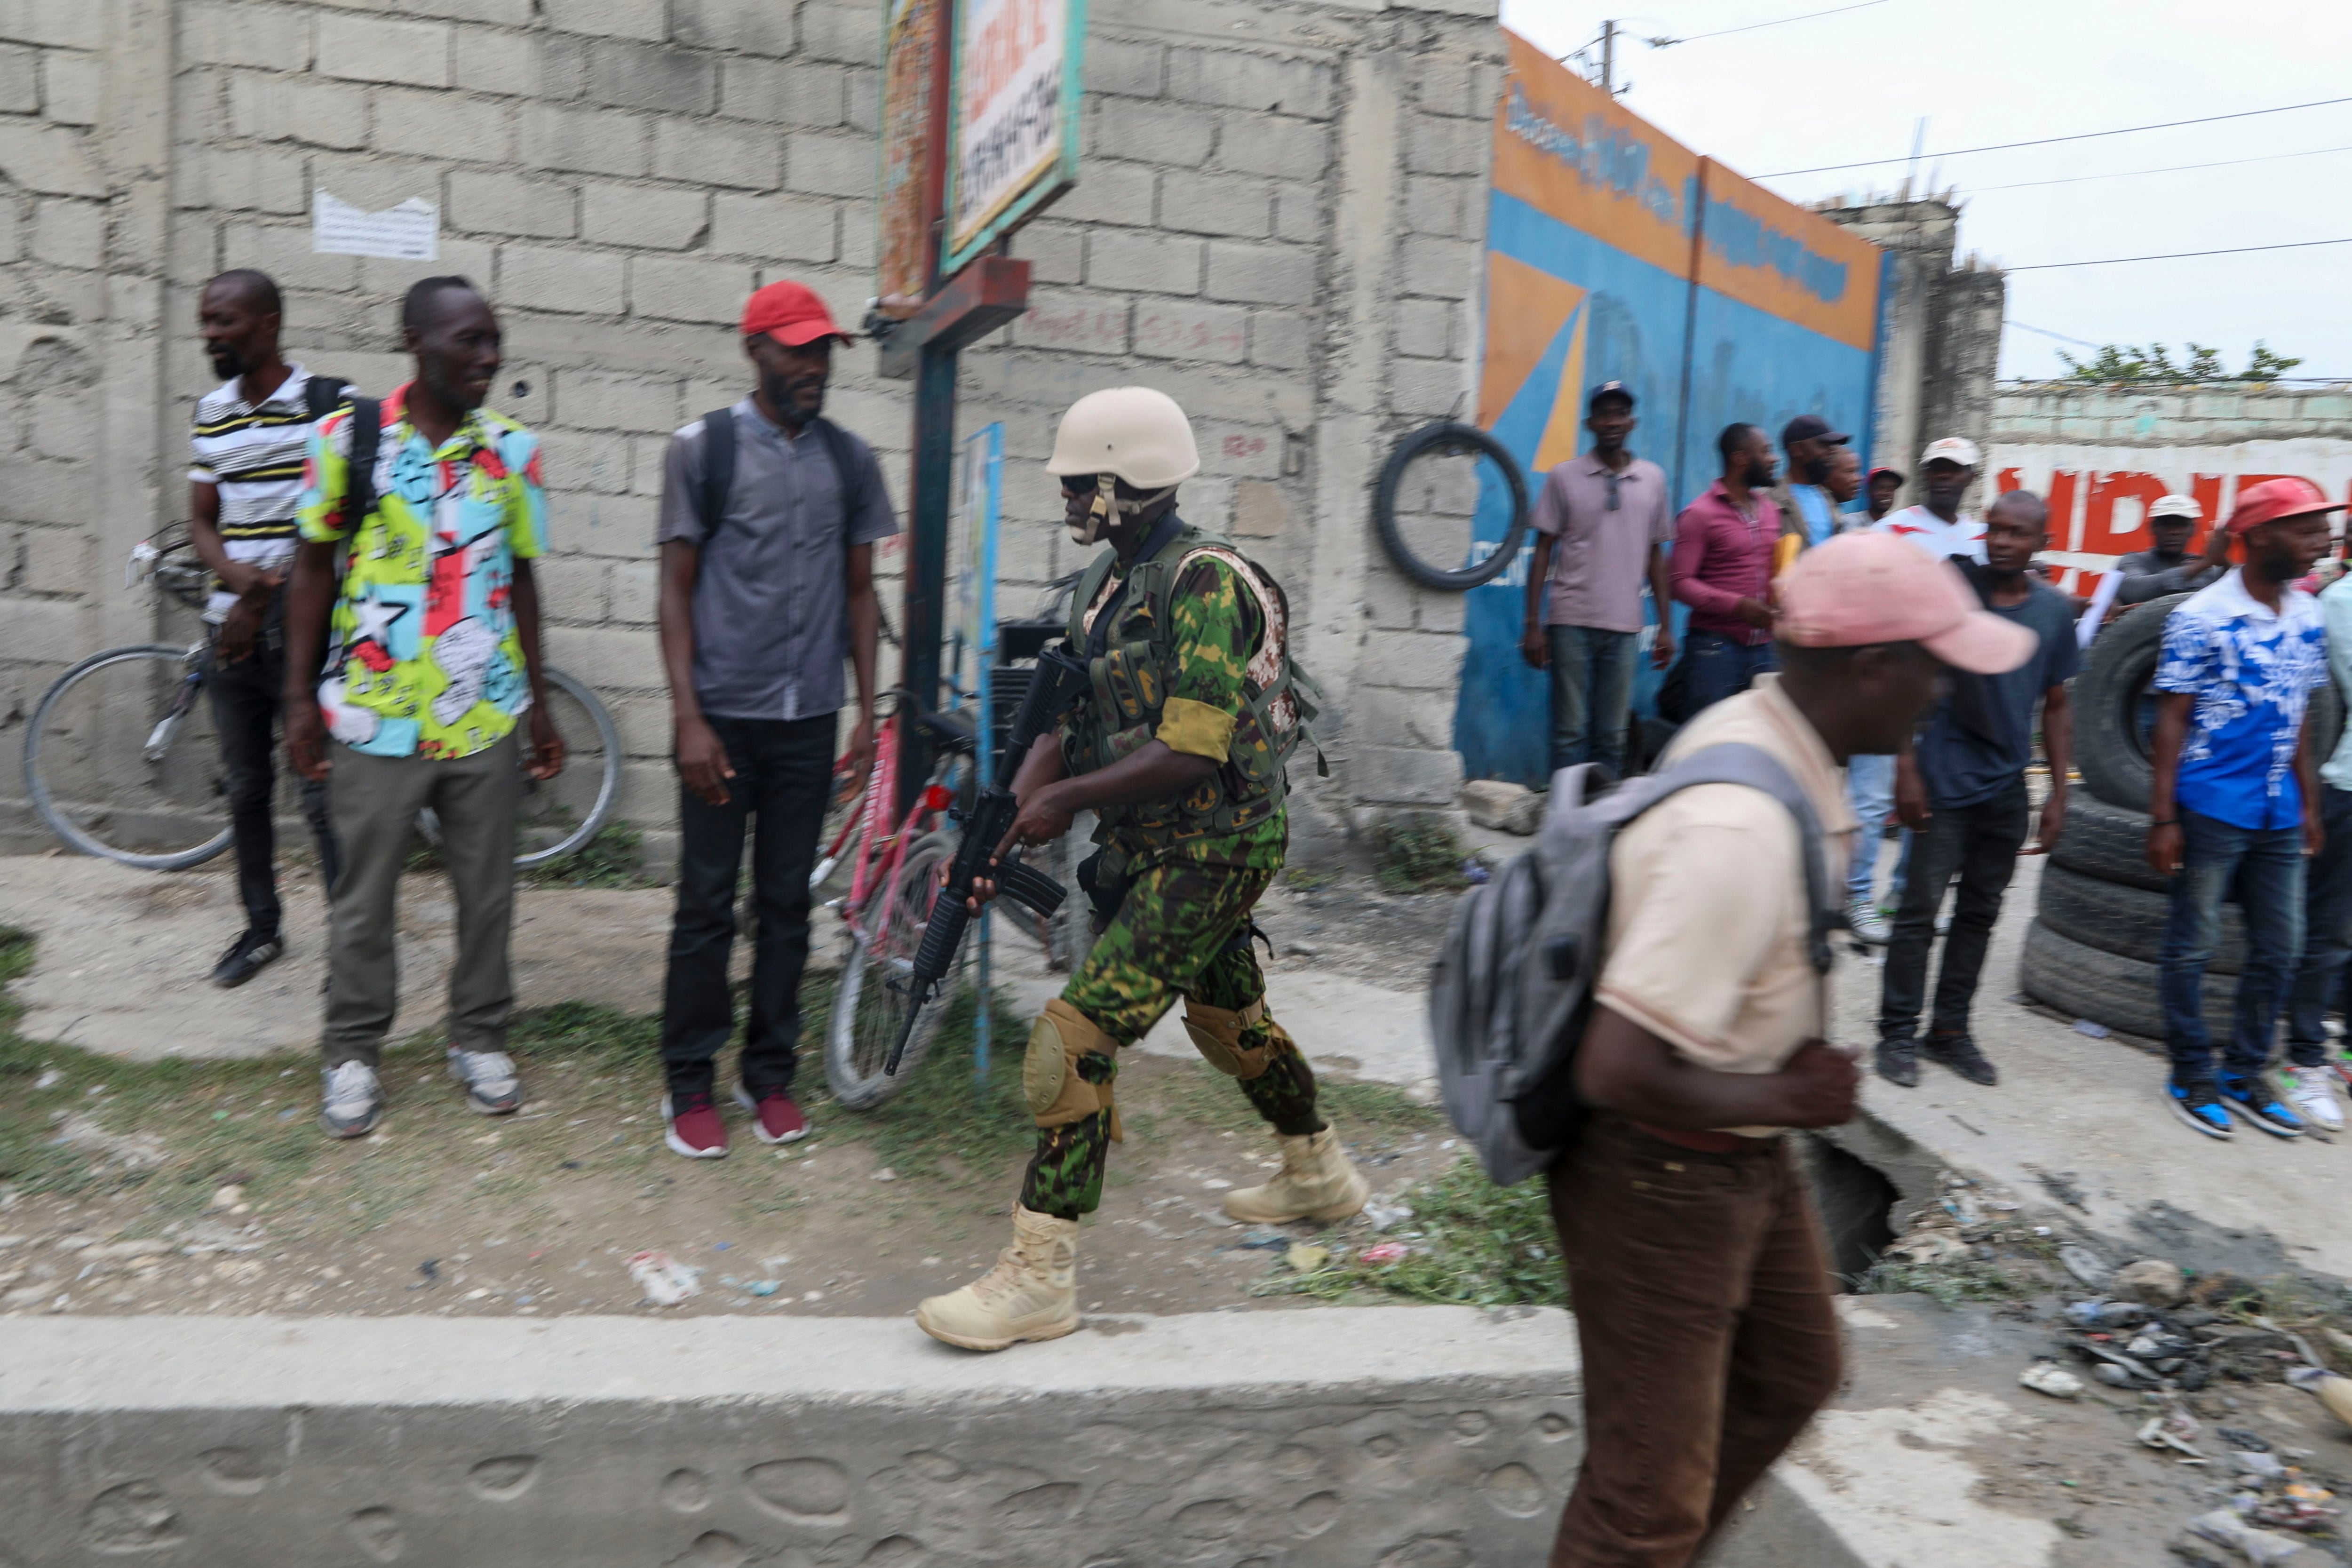 Haiti's prime minister says Kenya police is crucial to controlling gangs, calls early days positive thumbnail